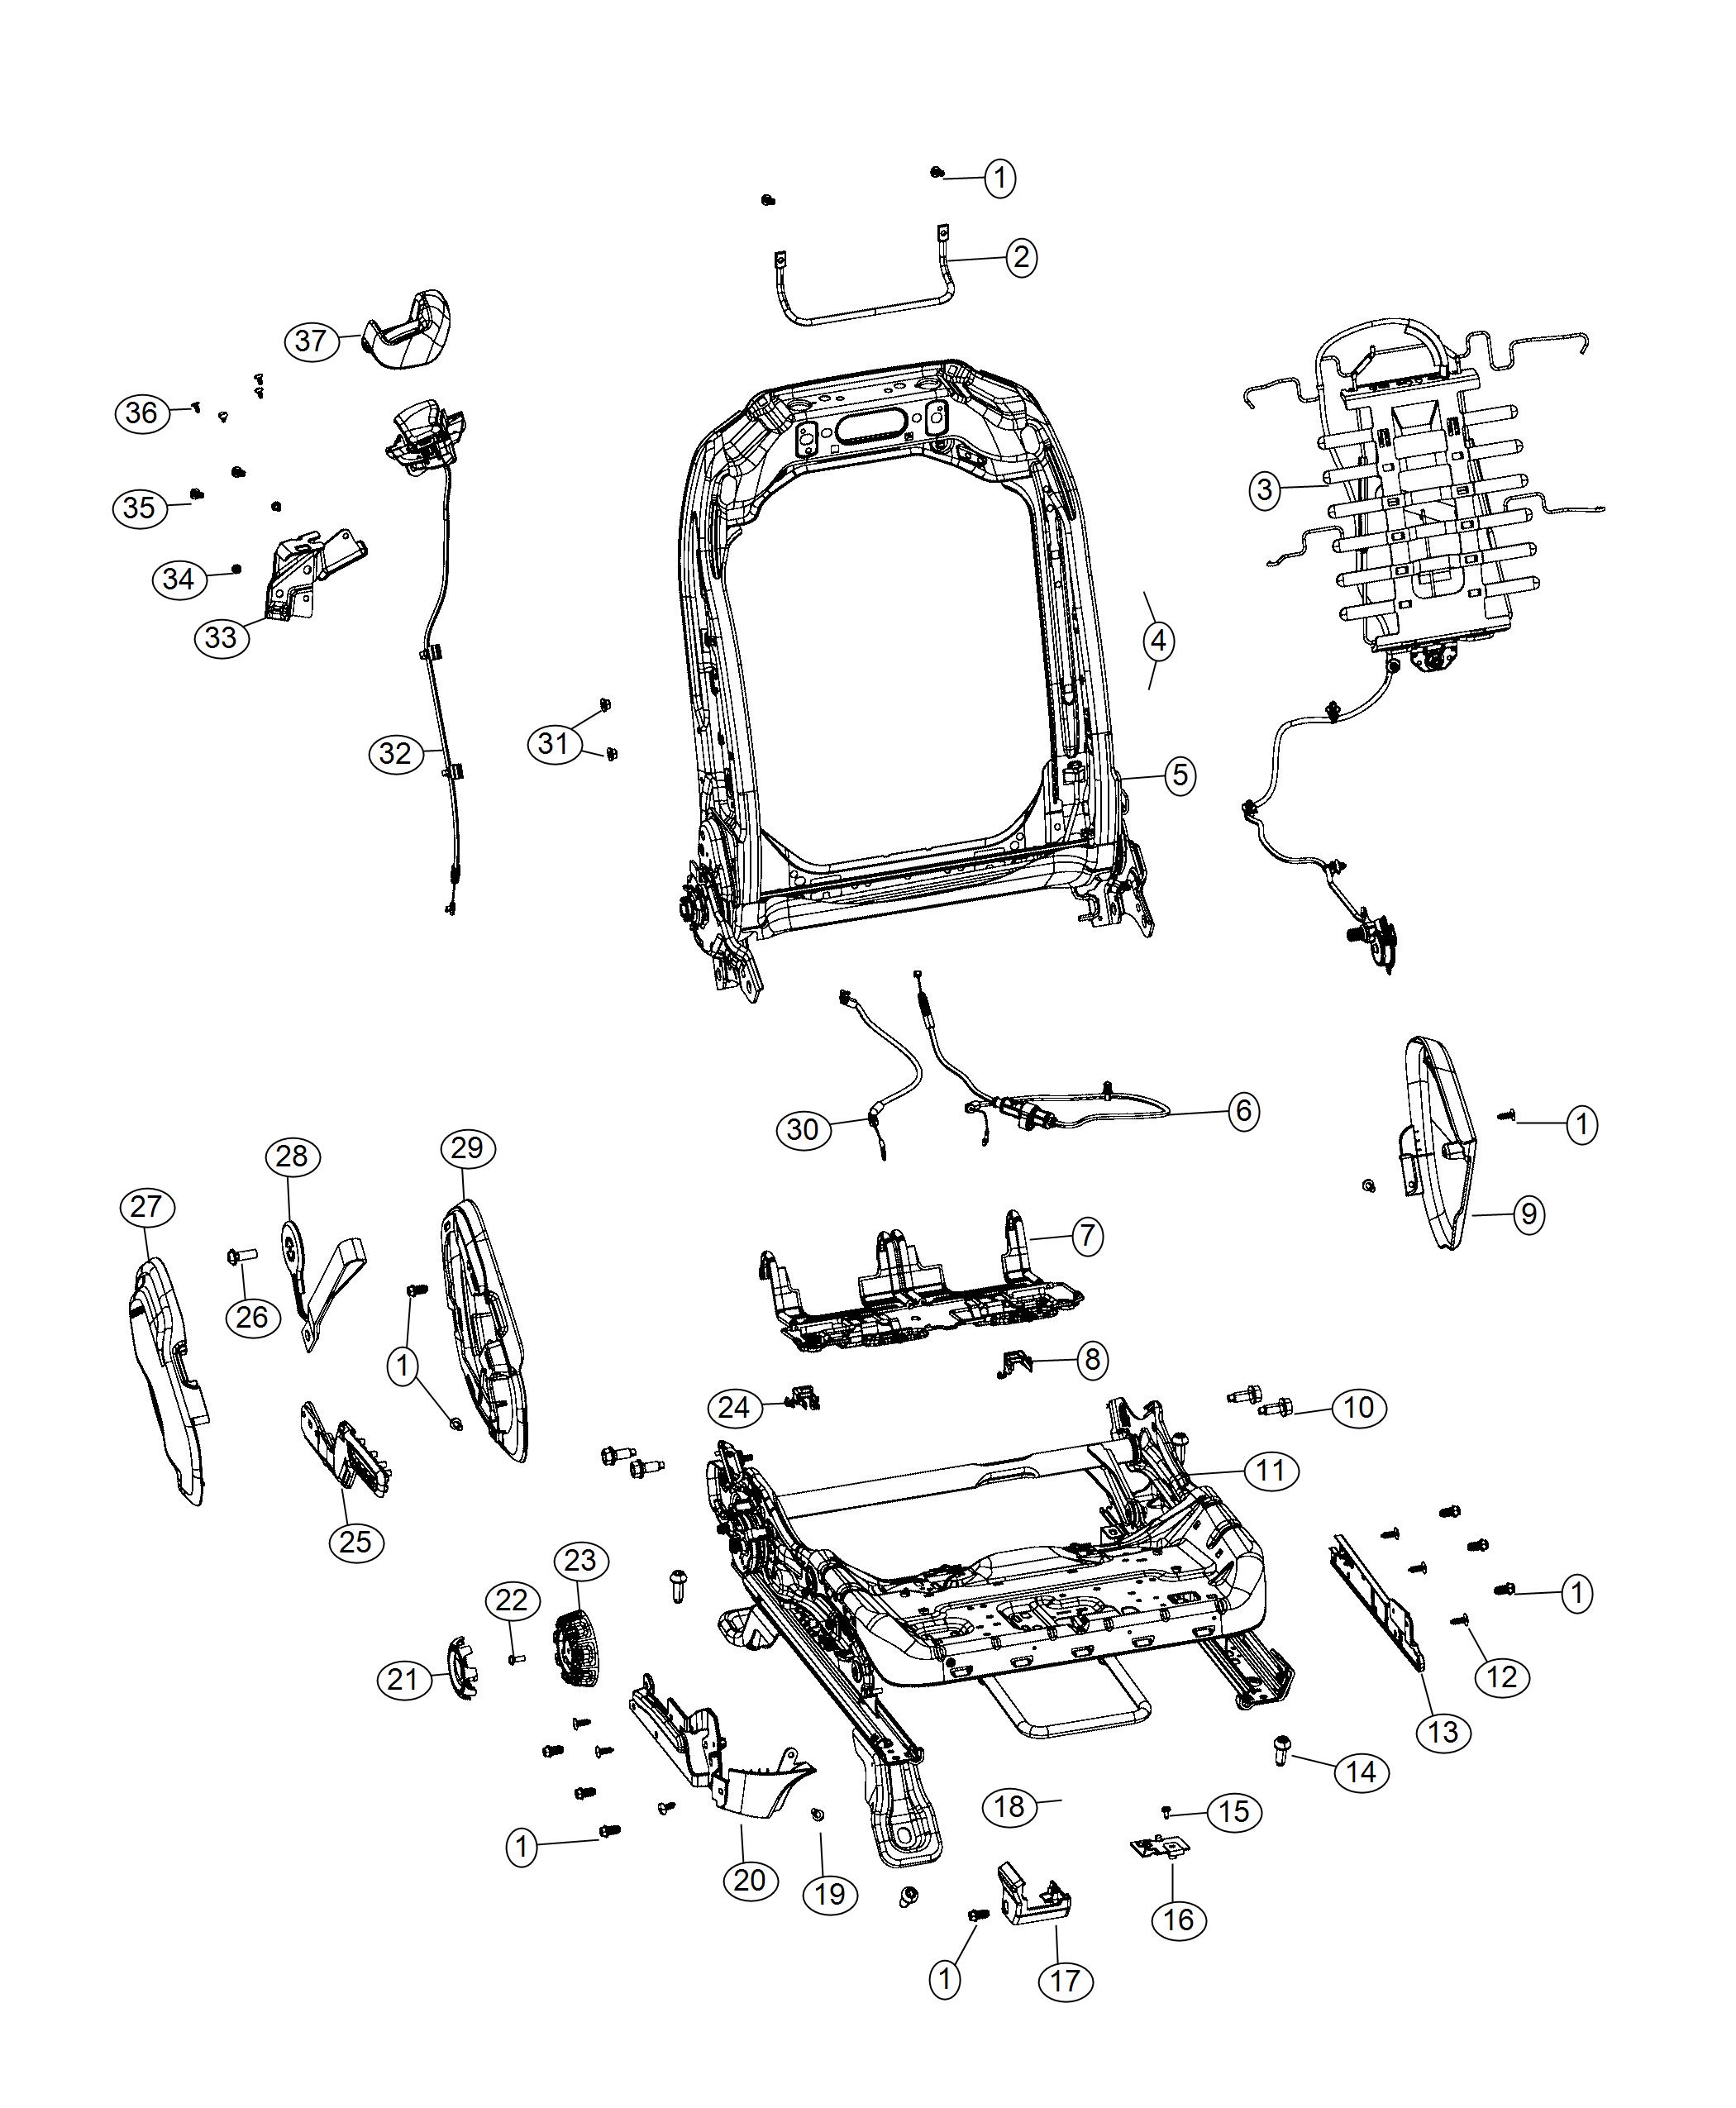 Diagram Adjusters, Recliners, Shields and Risers - Driver Seat - 72 Body. for your Jeep Wrangler  